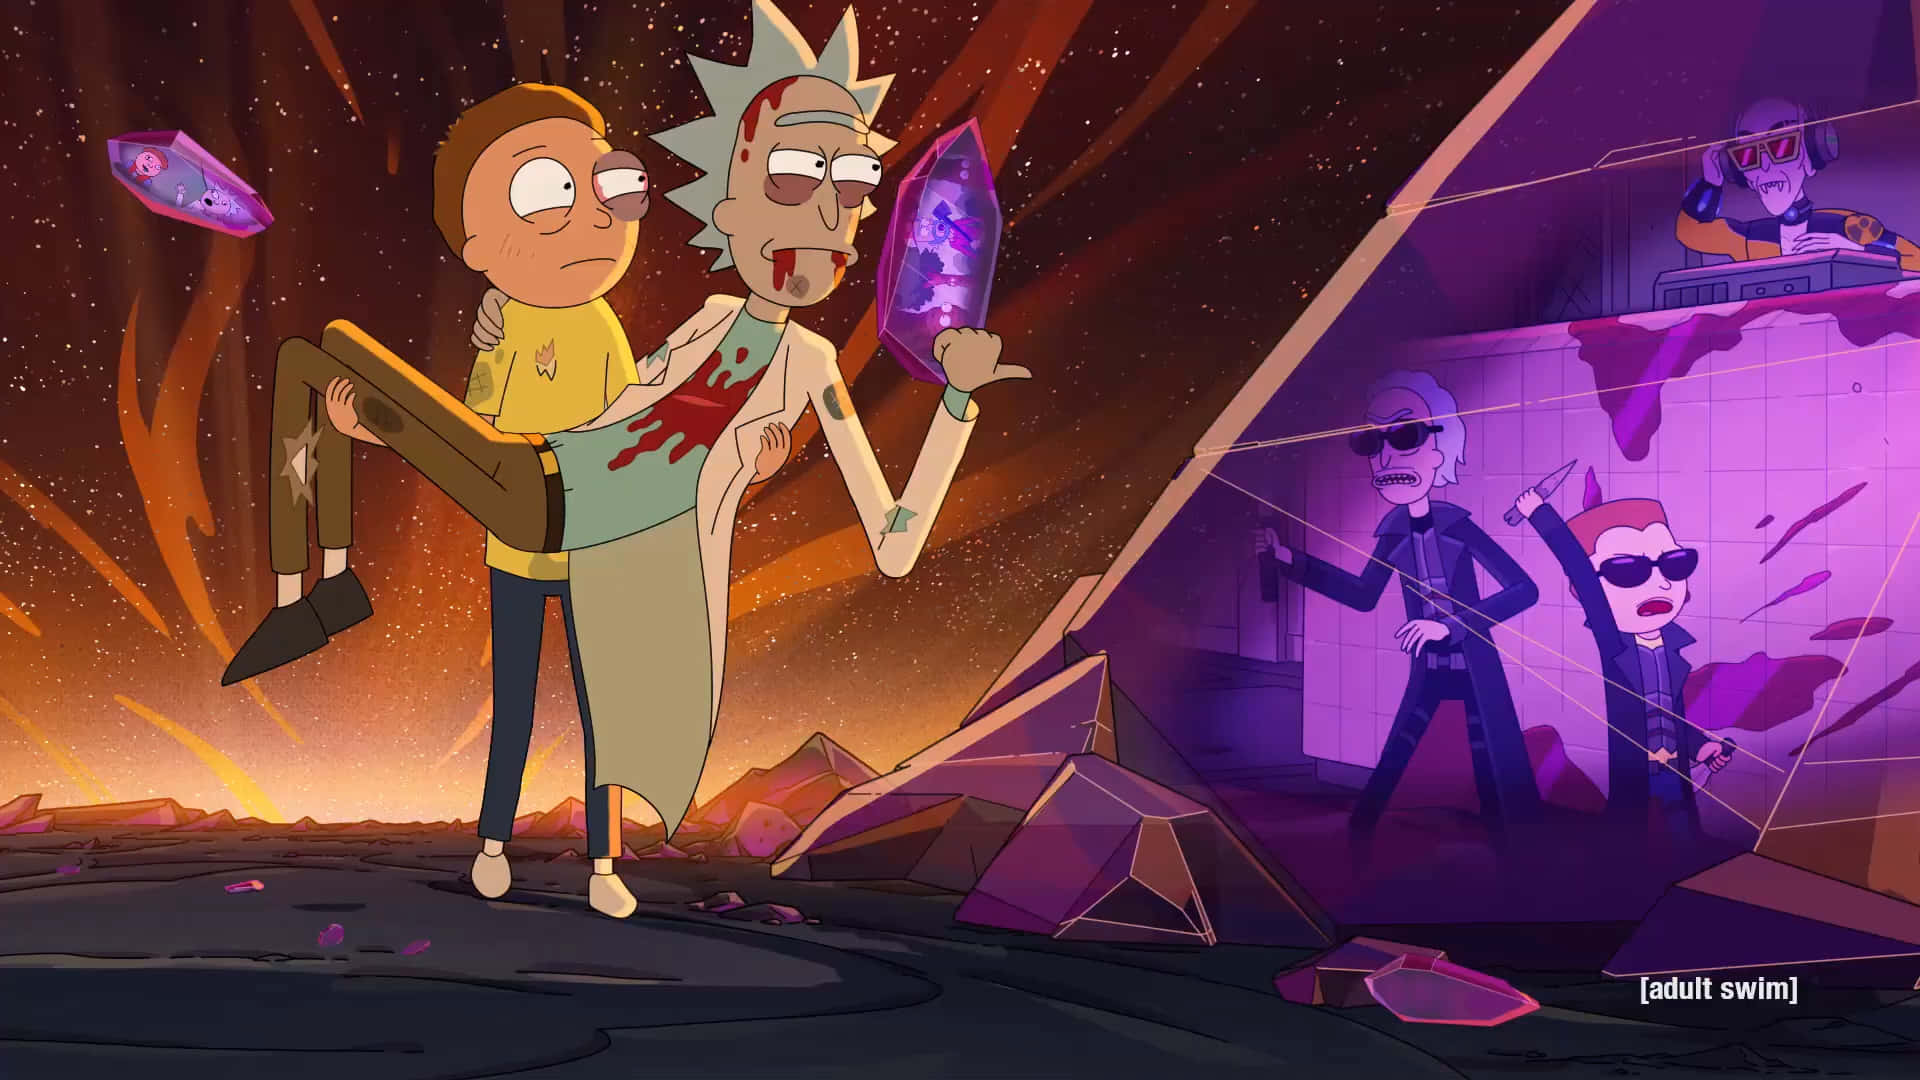 "Crazy Adventures of Rick and Morty"